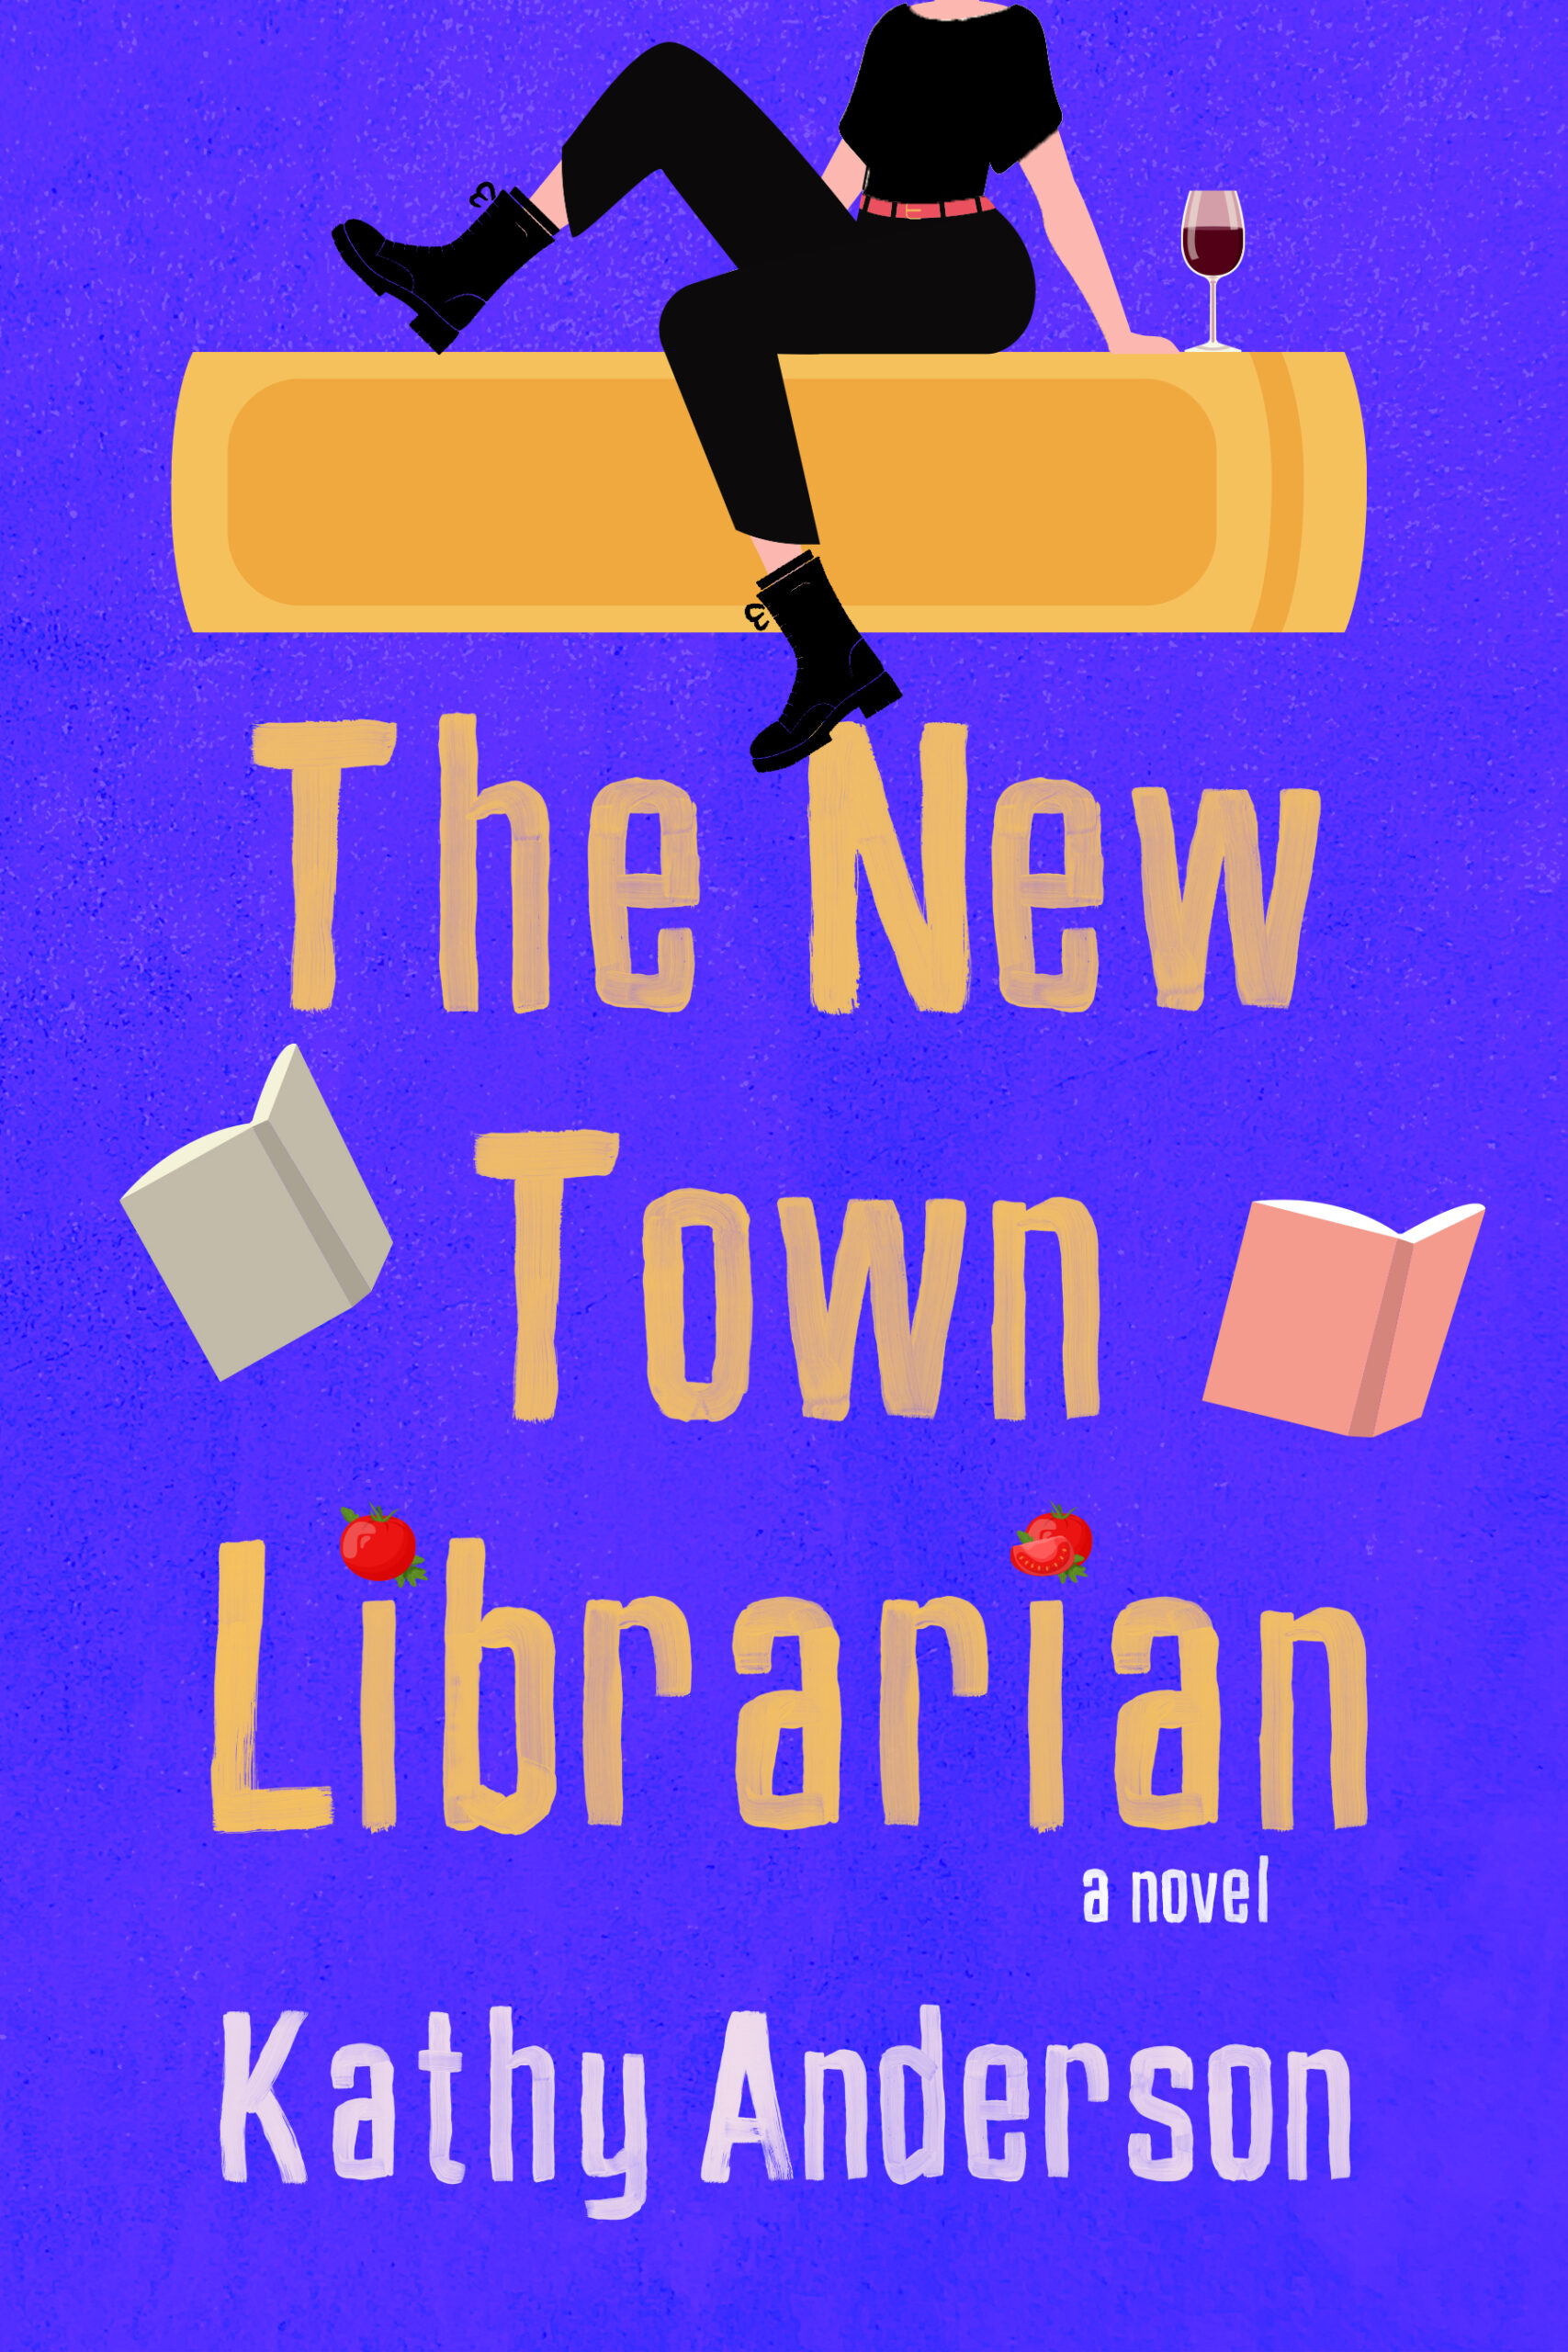 The New Town Librarian  by Kathy Anderson